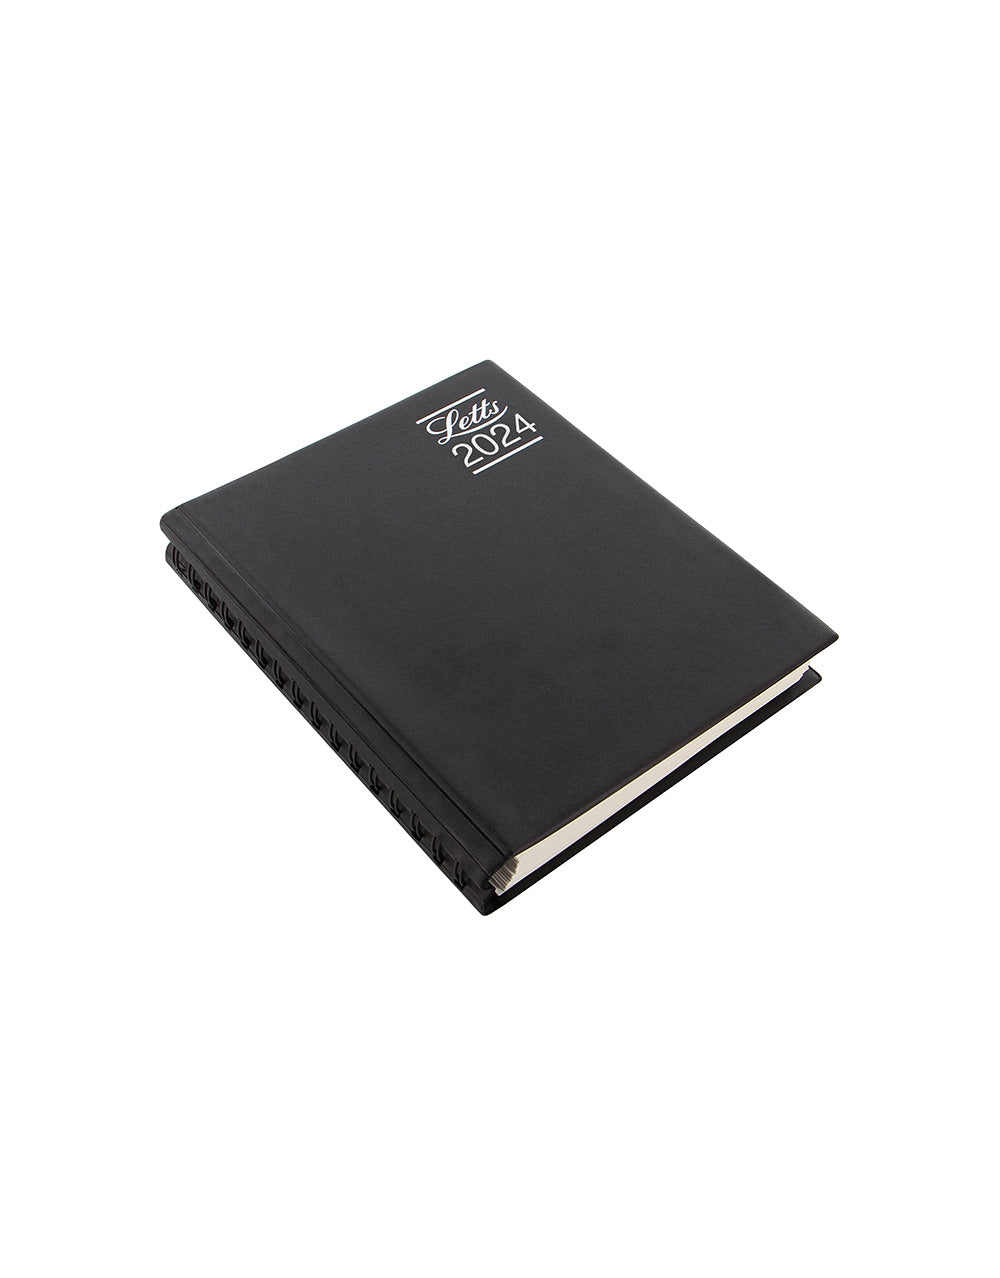 Rhino A5 Day to a Page Diary with Appointments, Notes and Planners 2024 - English#colour_black